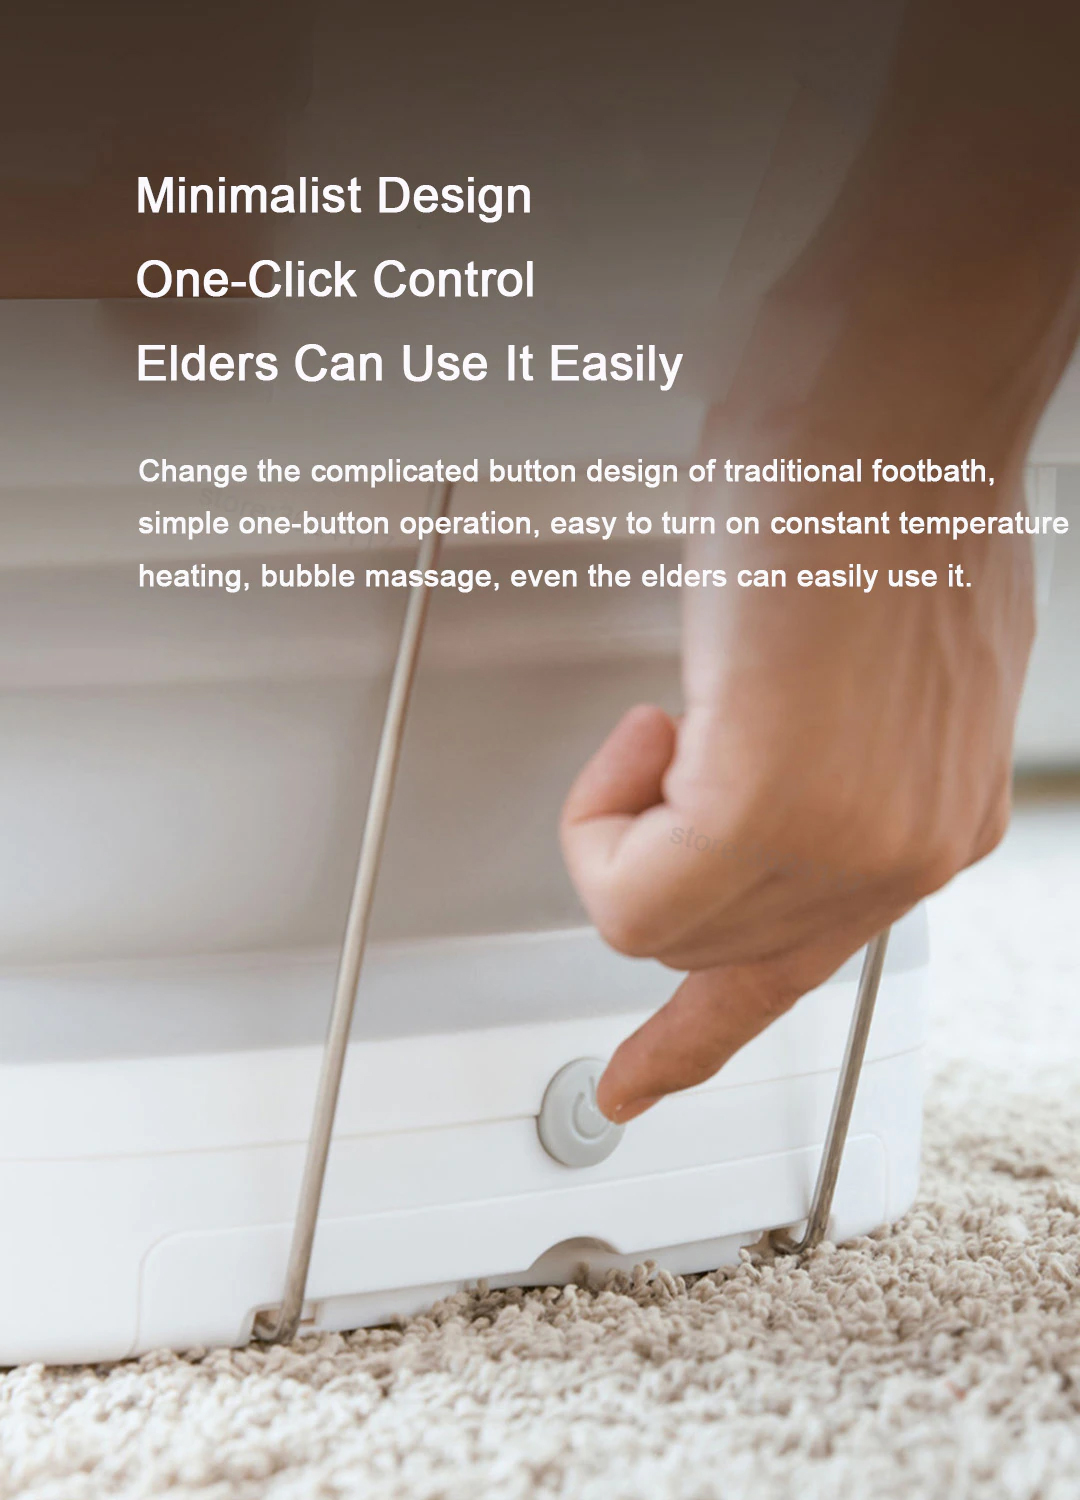 Minimalist Design One-Click Control Elders Can Use It Easily Change the complicated button design of traditional foot bath, simple one-button operation, easy to turn on constant temperature heating, bubble massage, even the elders can easily use it.